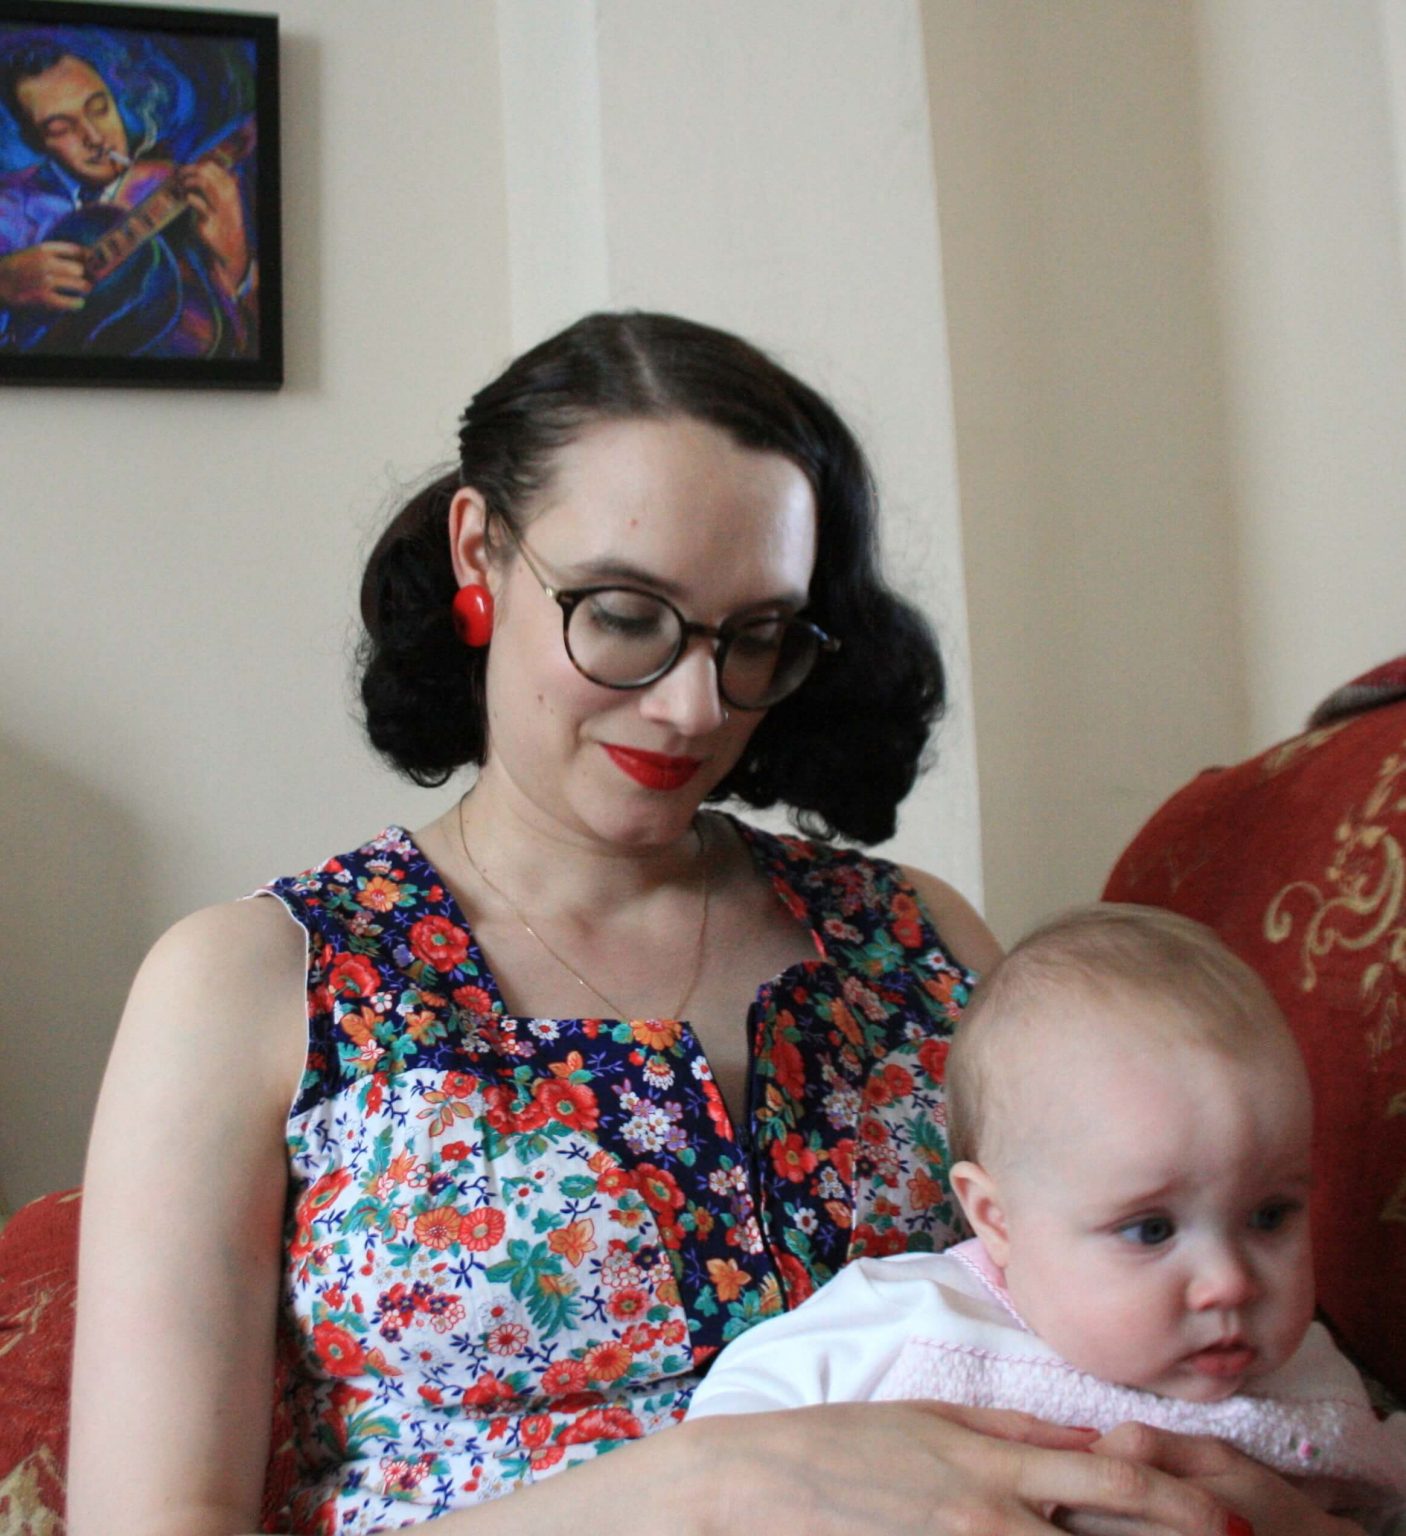 Vintage And Breastfeeding Finding The New You – The Vintage Woman